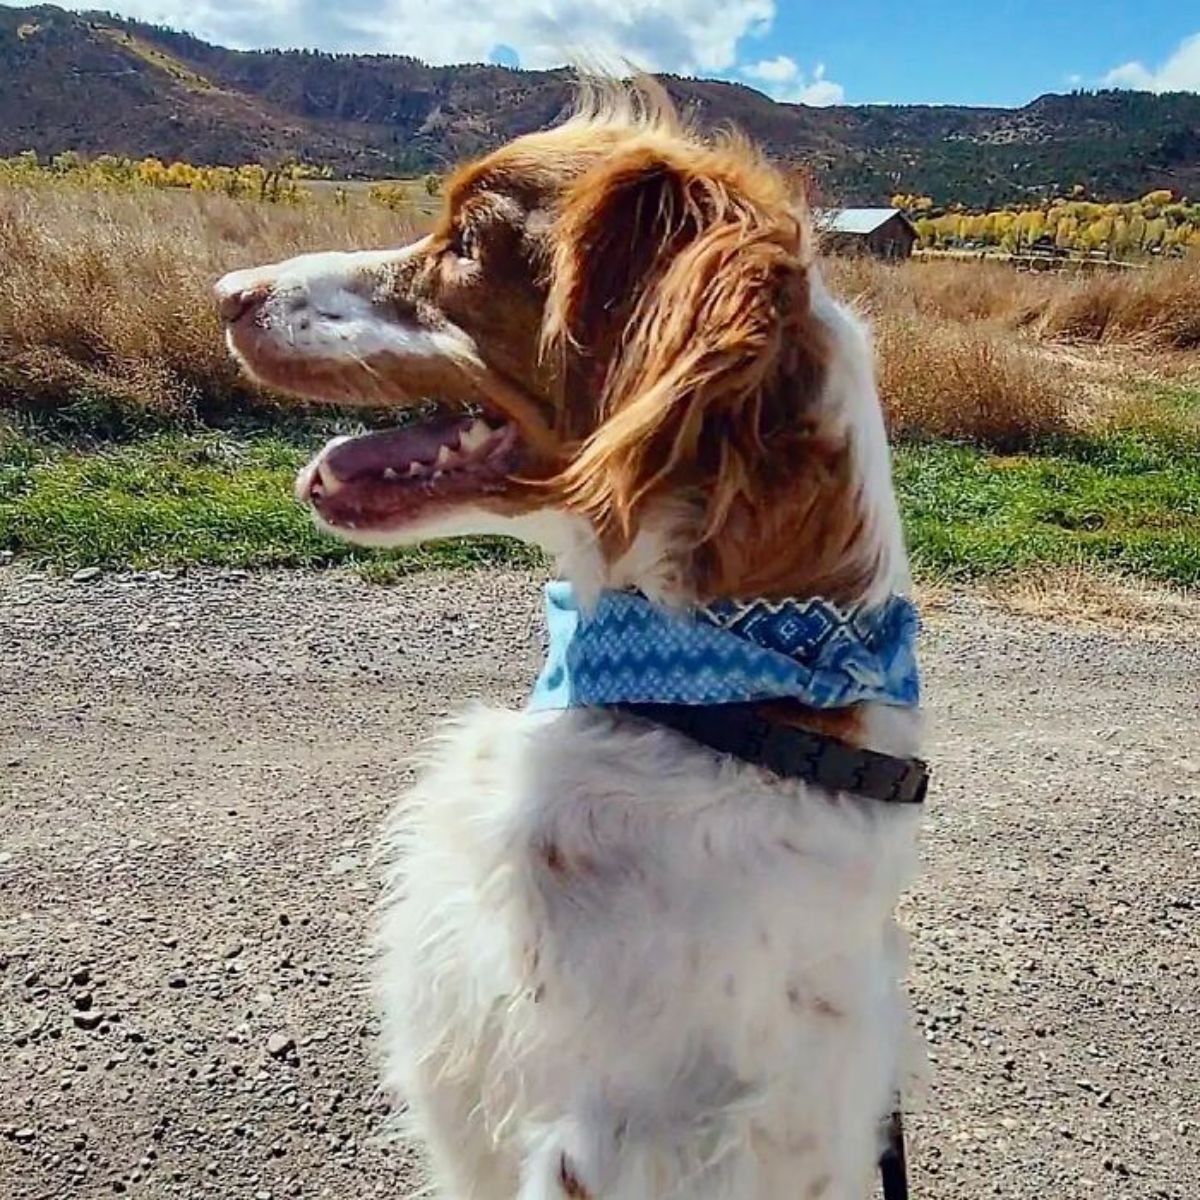 brown and white dog wearing a blue bandana standing on hind legs on a road